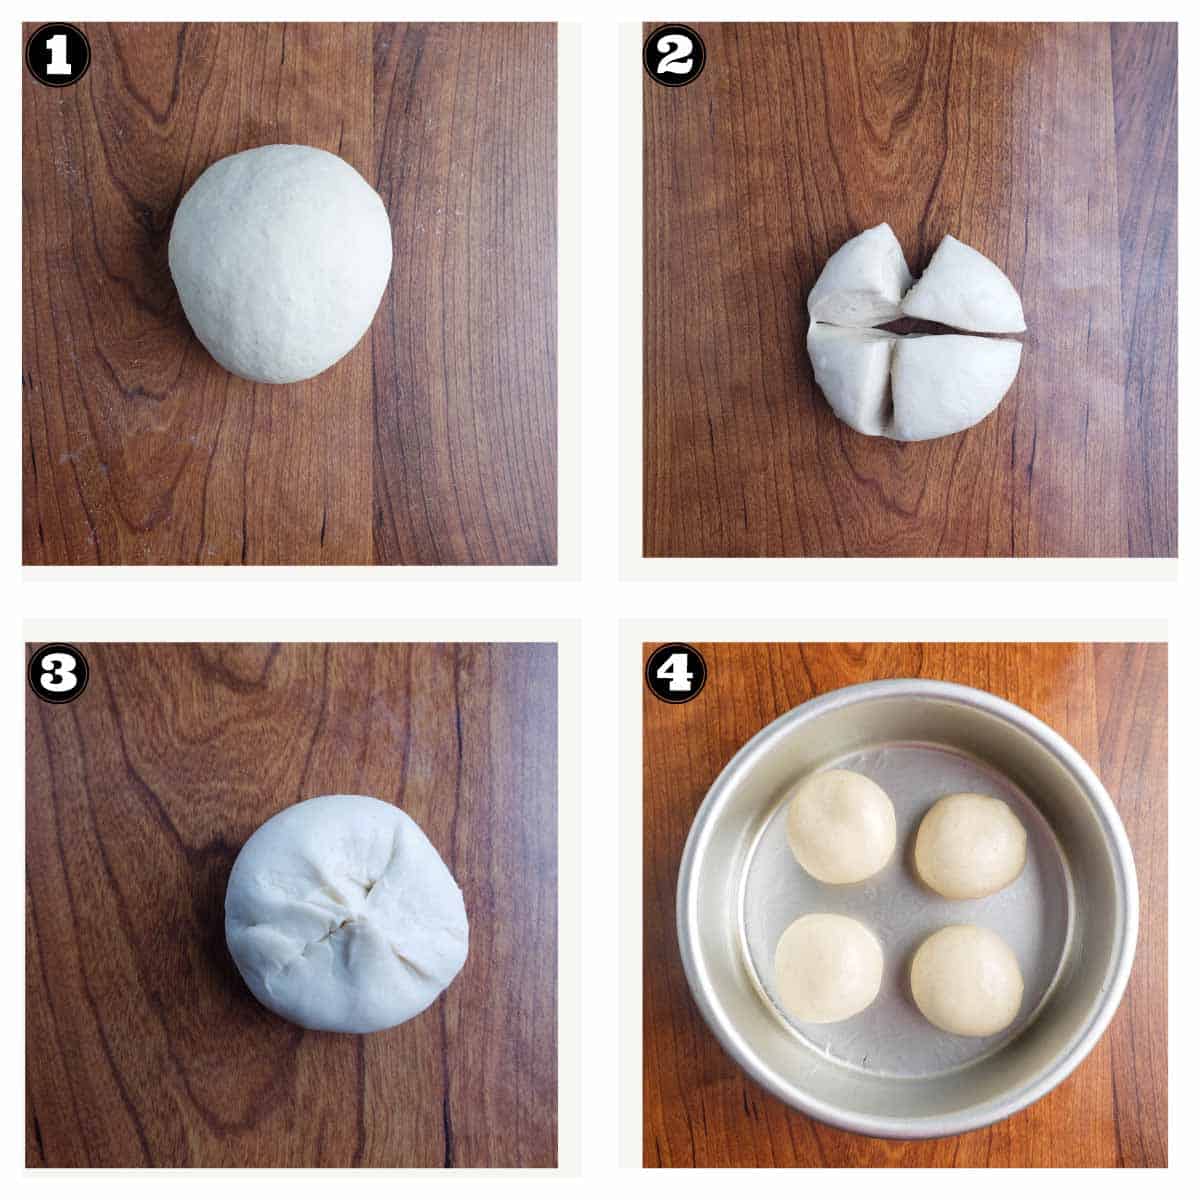 steps by step images of shaping dinner rolls for cooking in air fryer